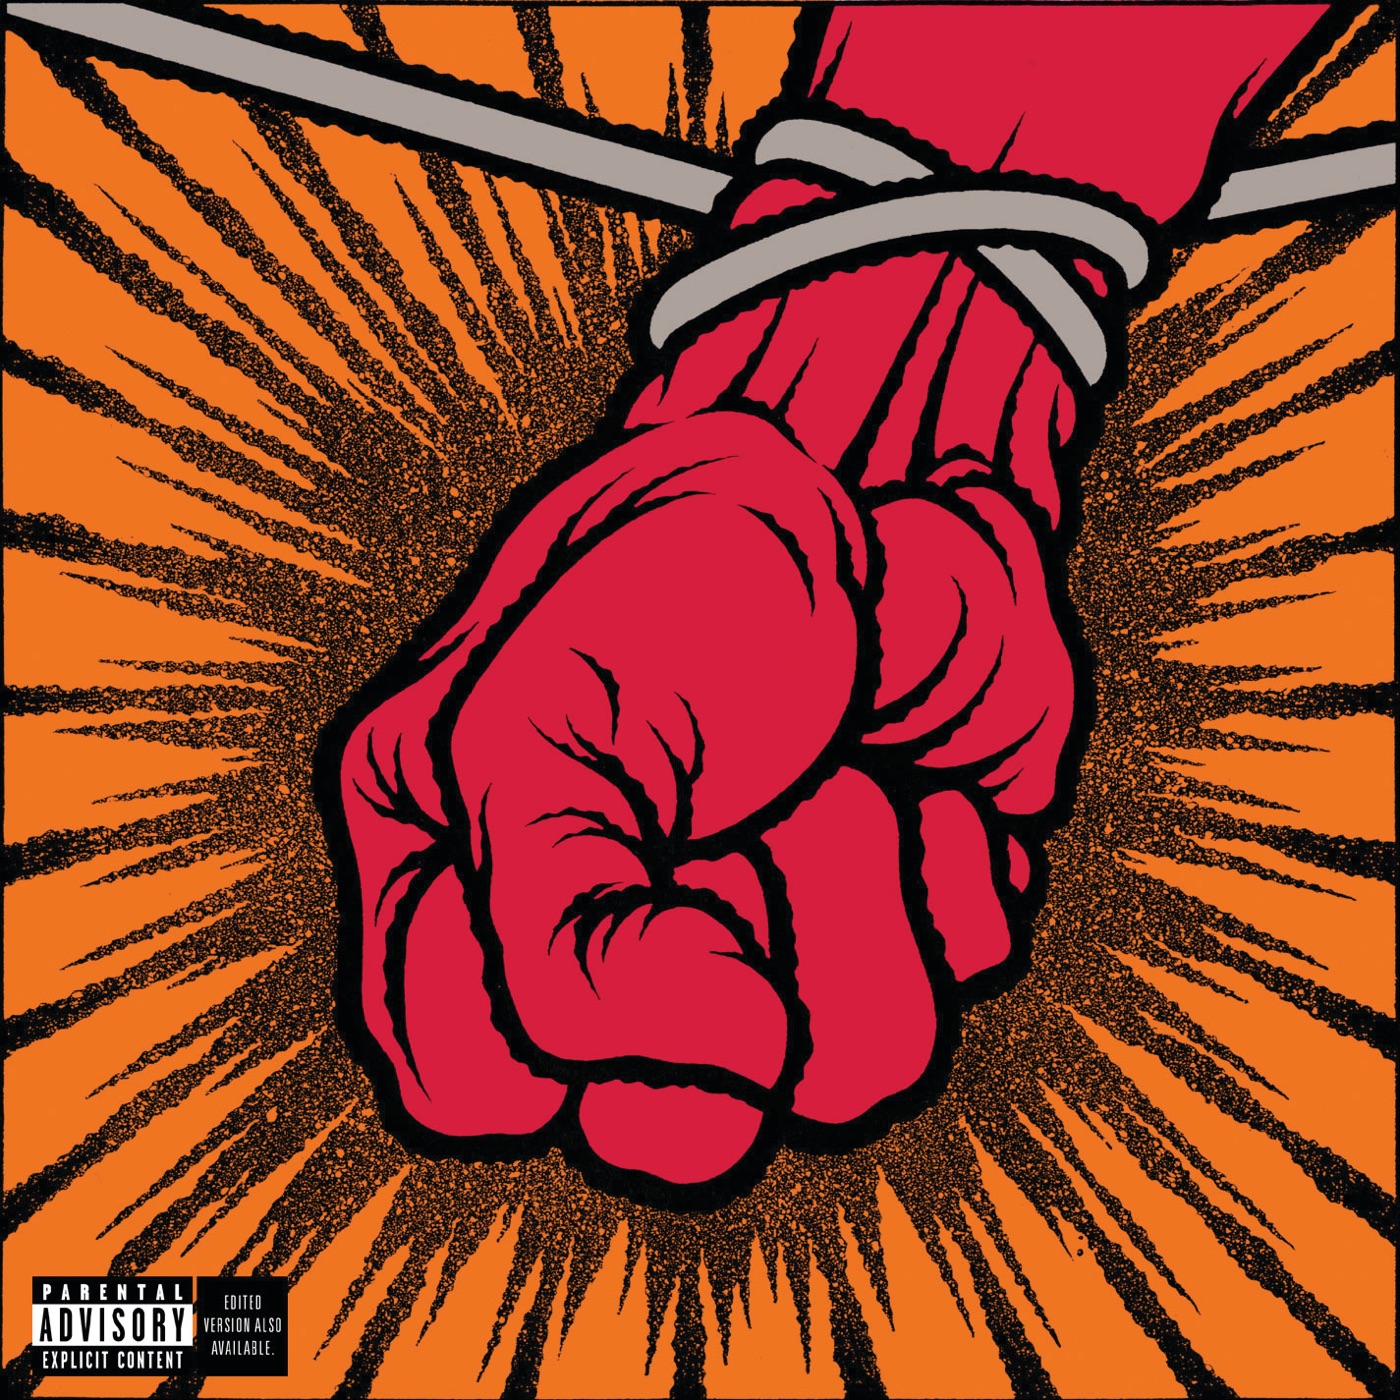 St. Anger by Metallica